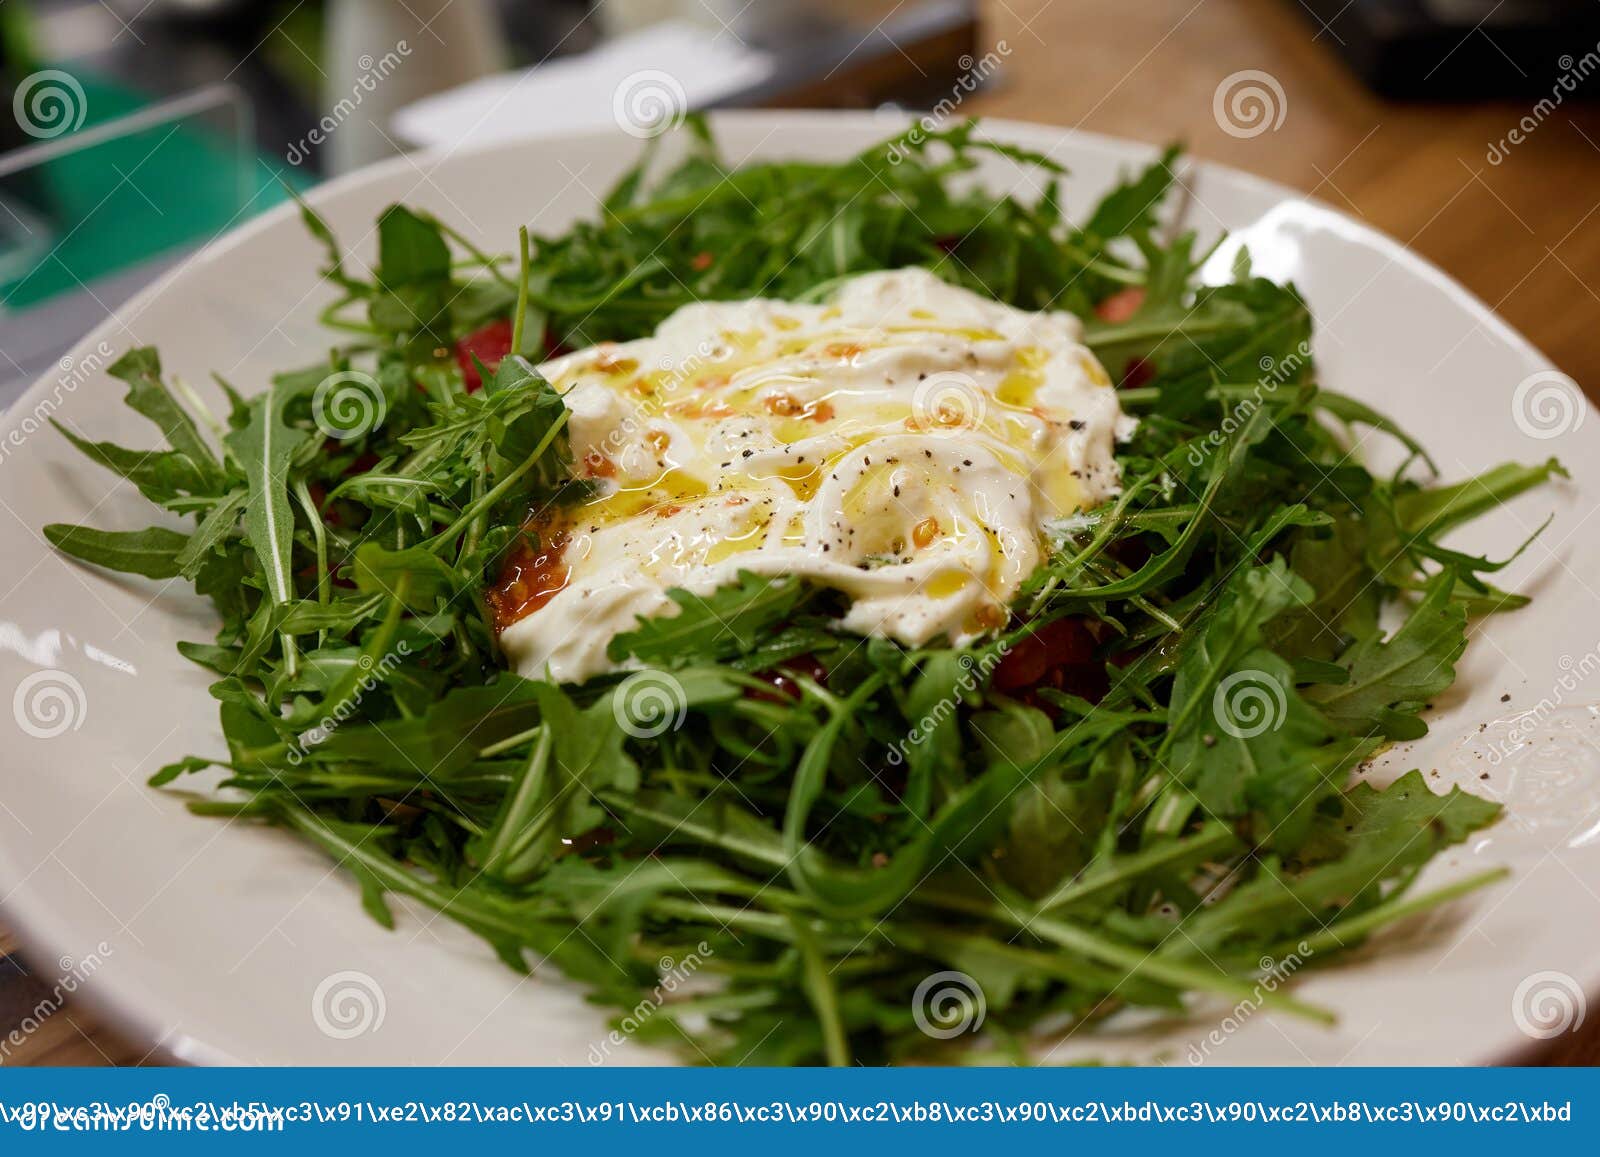 a green french bistro style salad with poached egg and chives on a white plate and table setting.